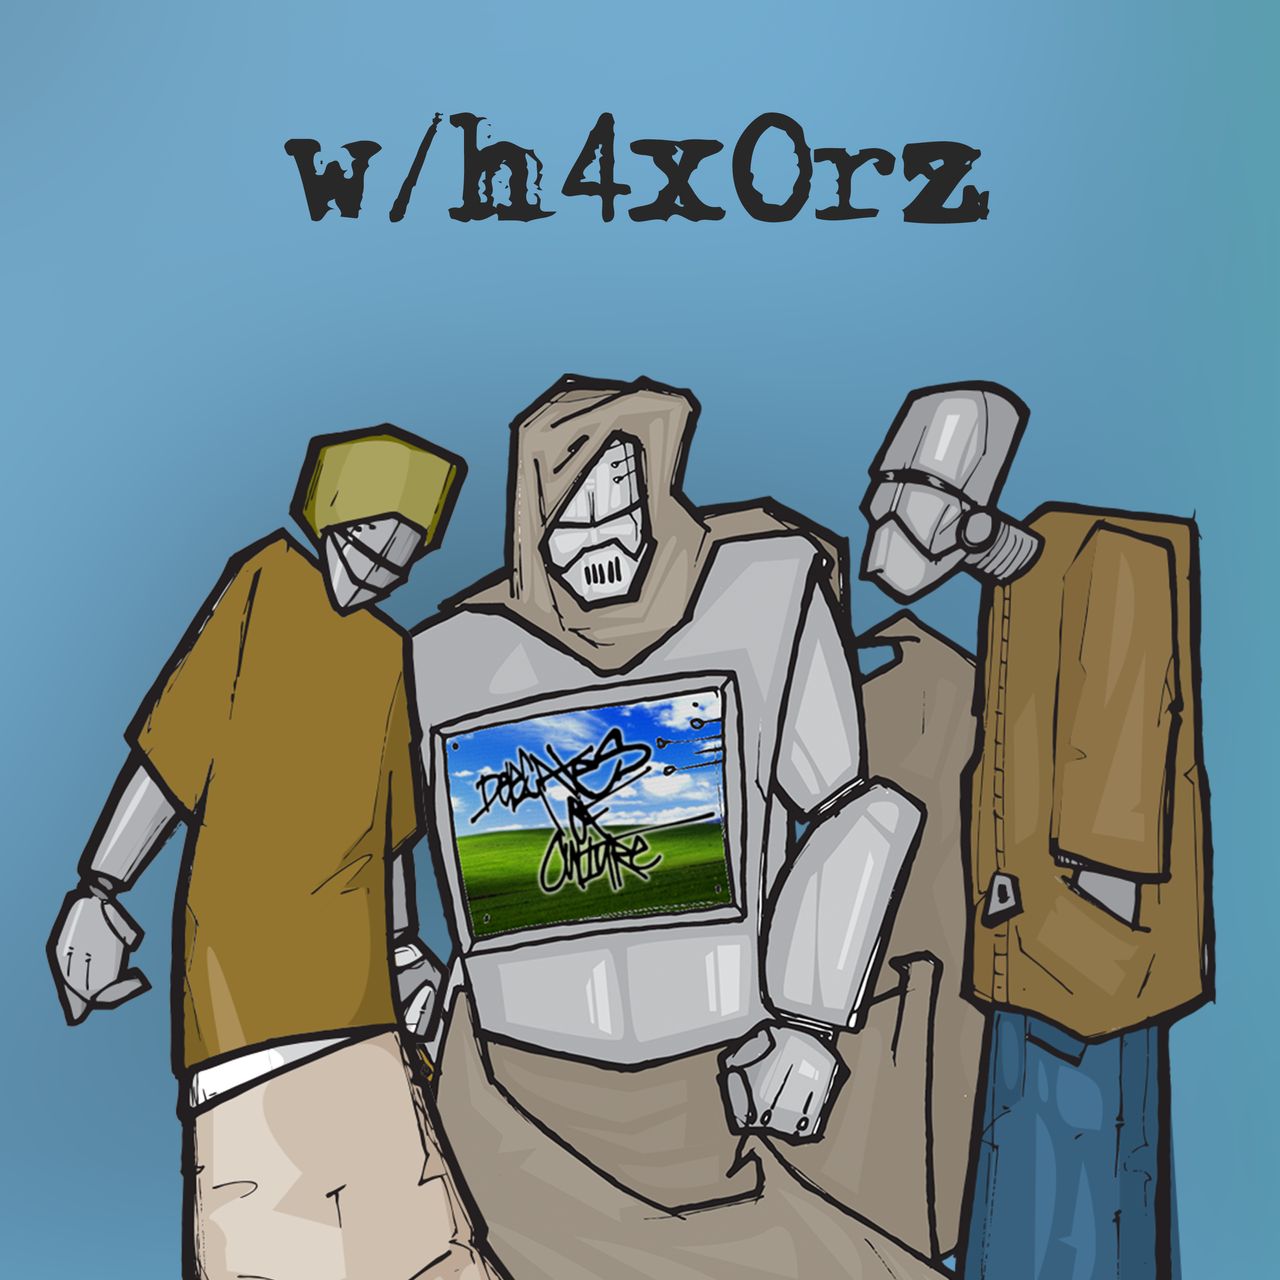 The robot avatars of Skuff, Ill Seer and Axwax are standing in front of a light blue background underneath the word w/h4x0rz in an old typewriter font. On Ill Seer's chest is a monitor displaying the Delegates of Culture logo in front of the Windows 95 wallpaper.